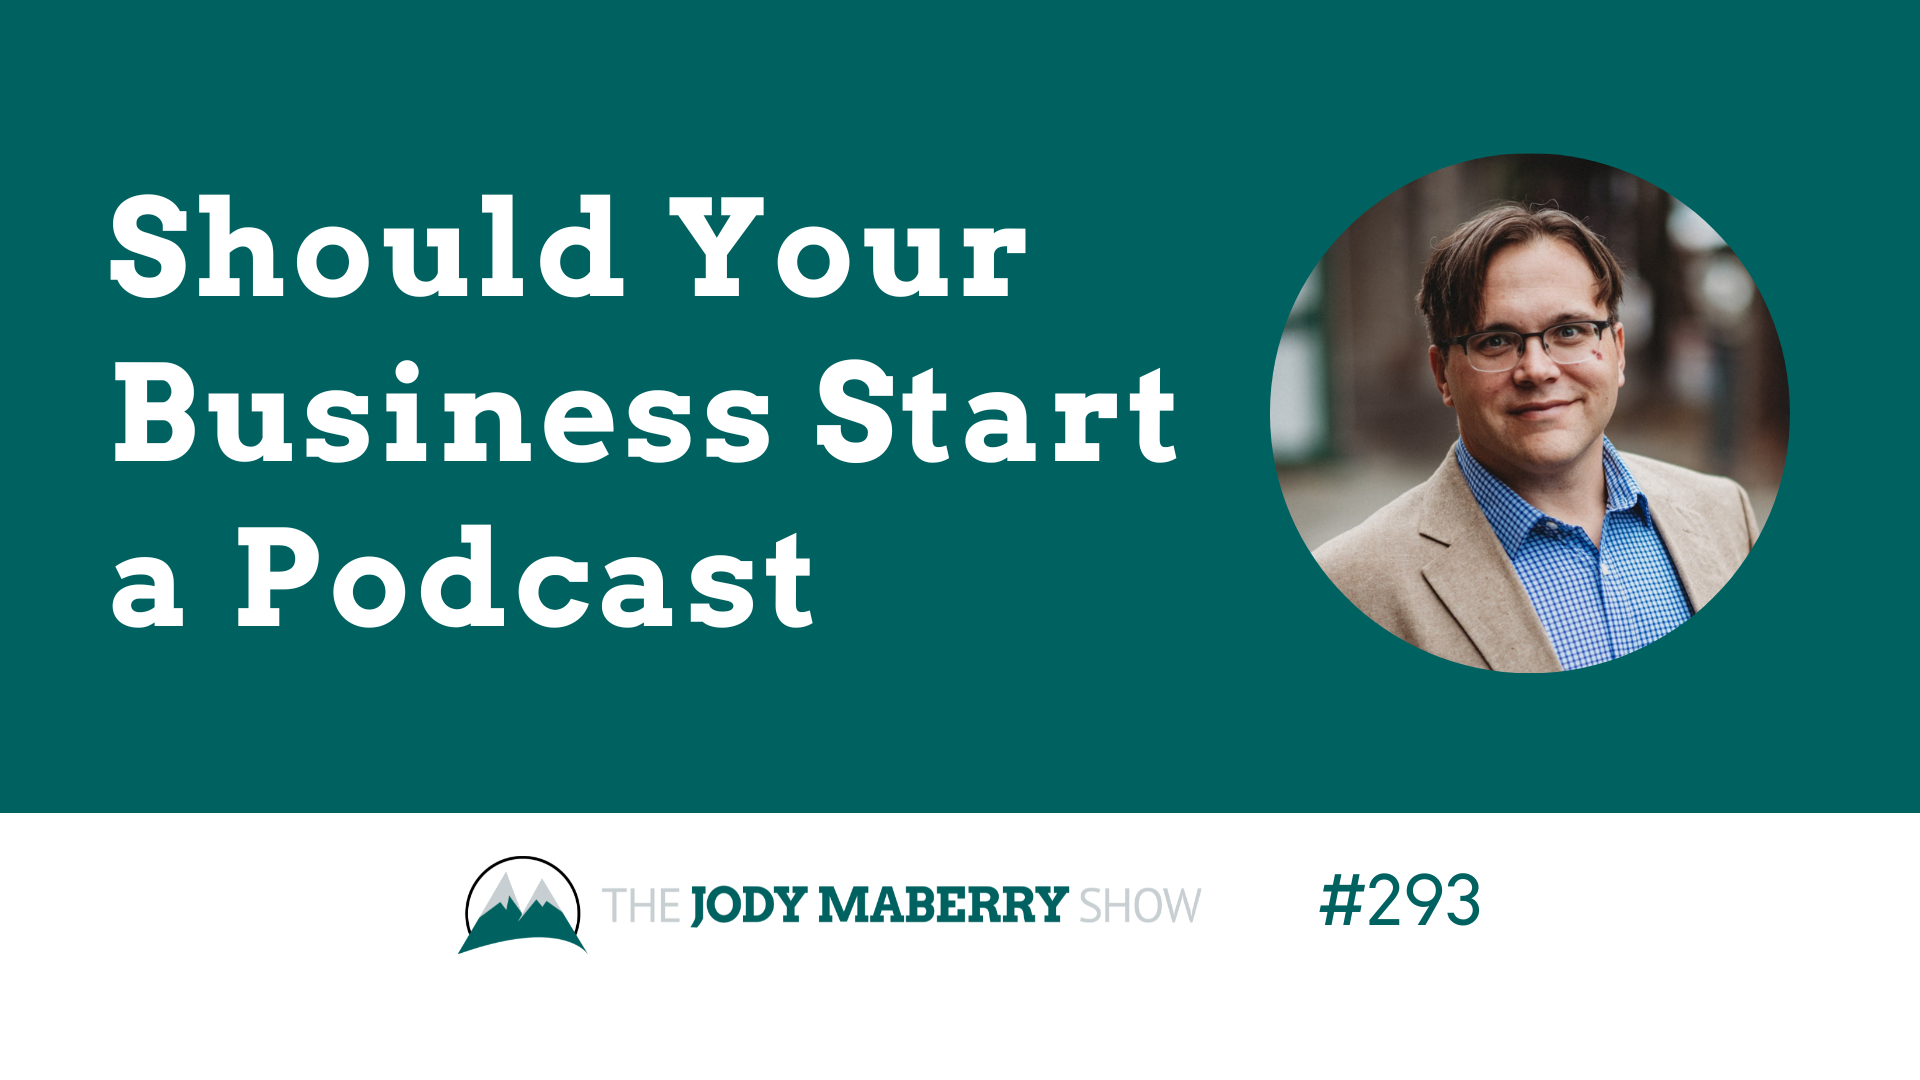 Jody Maberry Show Episode 293 Should your Business Start a Podcast